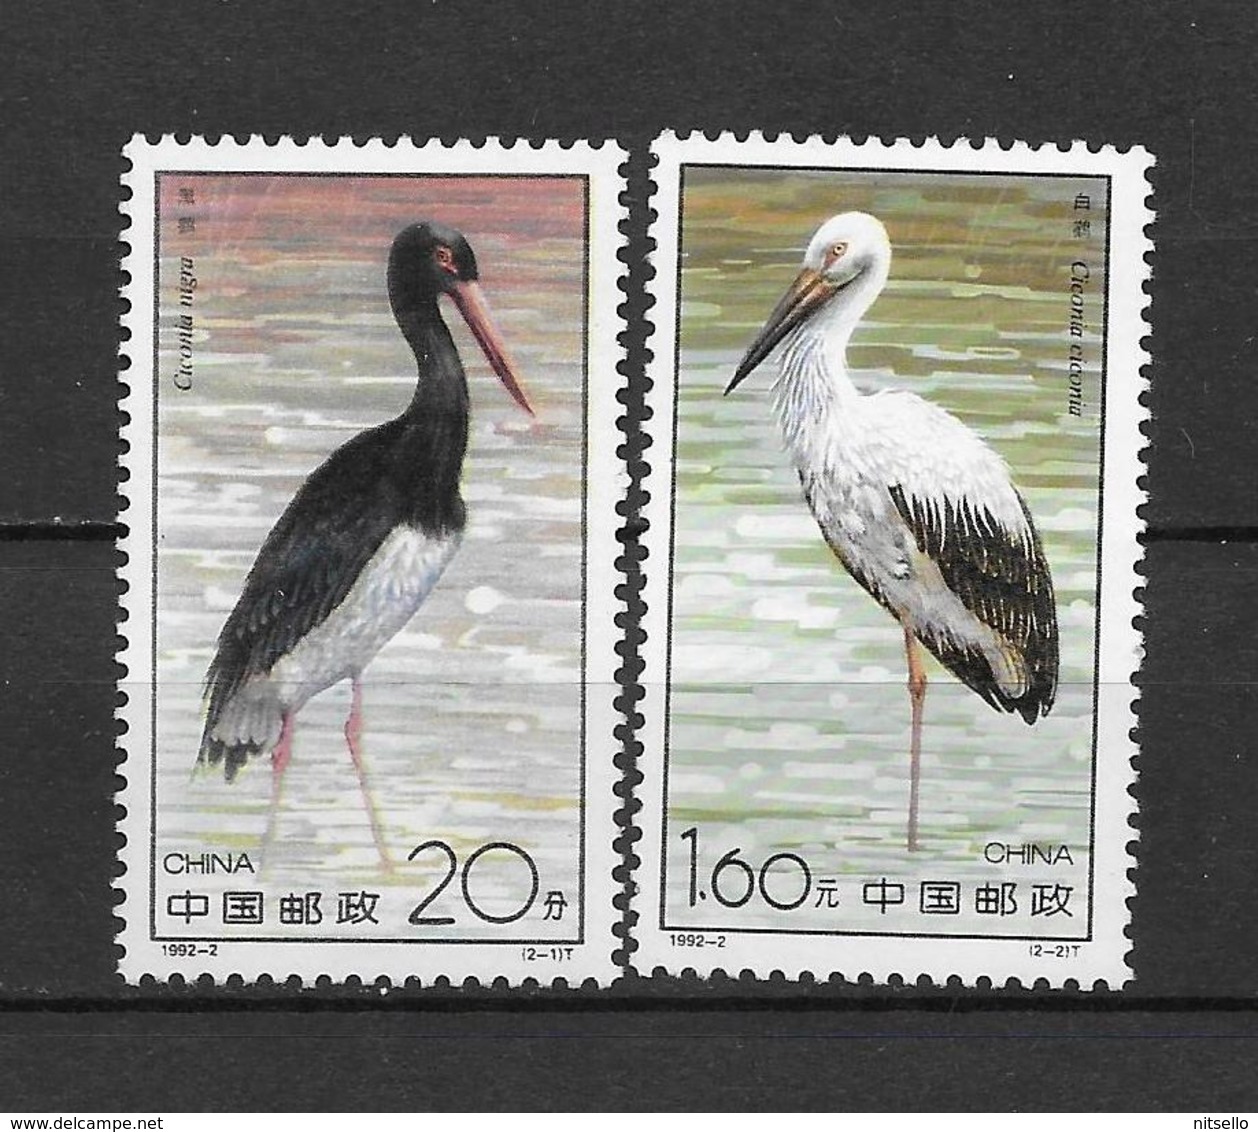 LOTE 1798   ///  (C080)   CHINA 1992-Storks **MNH     ¡¡¡ OFERTA !!!! - Used Stamps